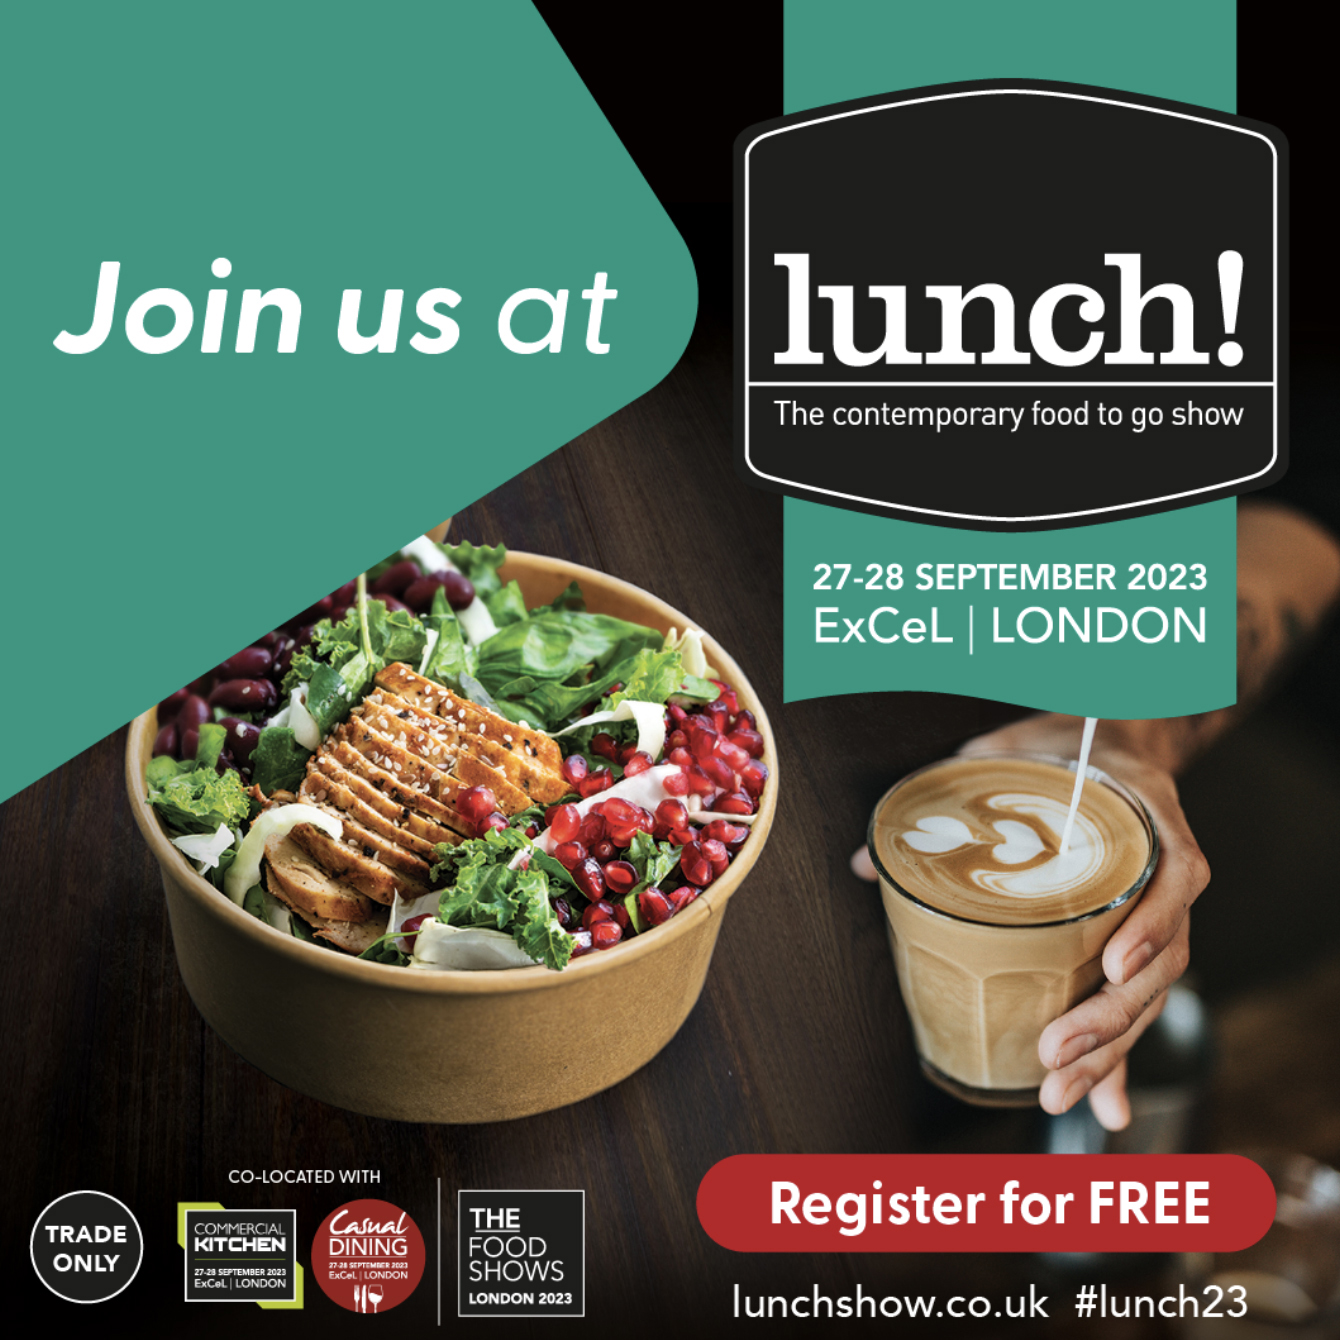 A bowl of salad beside a coffee cup. Text reads: "Join us at lunch! The contemporary food to go show, 27-28 September 2023, ExCeL | LONDON. Register for FREE. lunchshow.co.uk #lunch23" Co-located with: Trade Only, Commercial Kitchen (27-28 September 2023, ExCeL, London), Casual Dining (27-28 September 2023, ExCeL, London), The Food Shows London 2023.